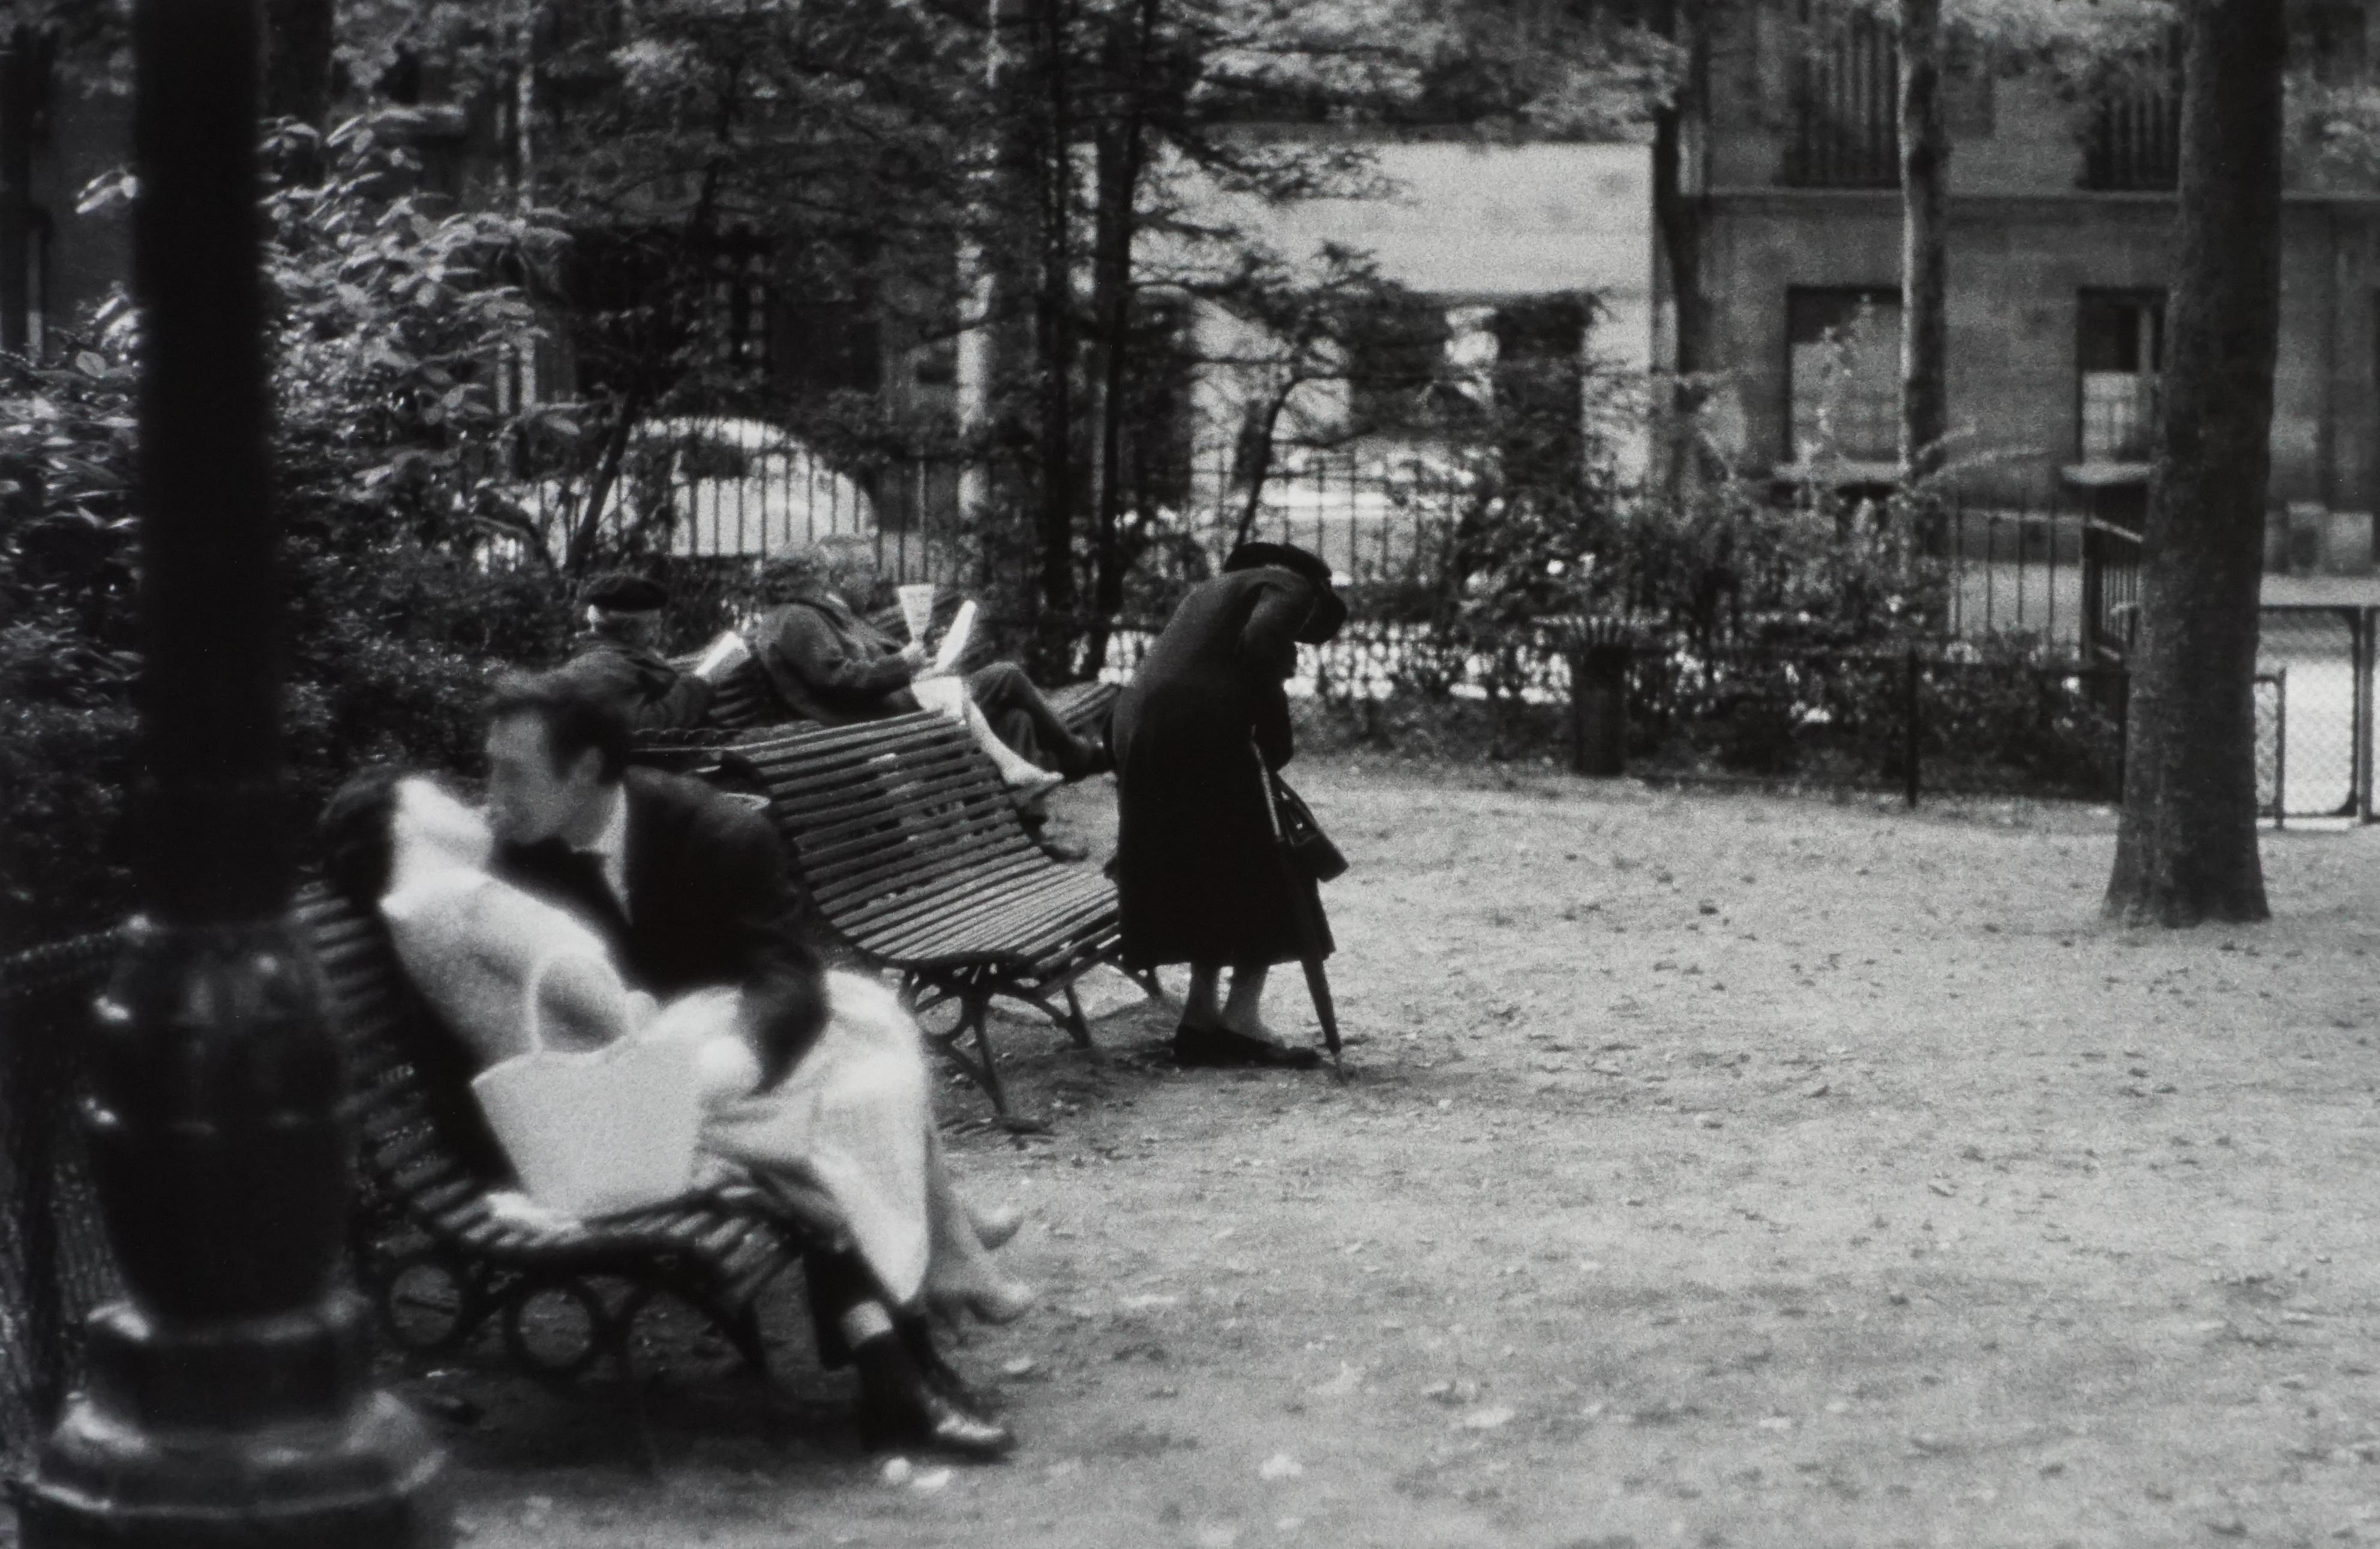 Bruce Davidson Black and White Photograph - The Widow of Montmartre 1956 (Lady and Gentleman on park bench kissing)